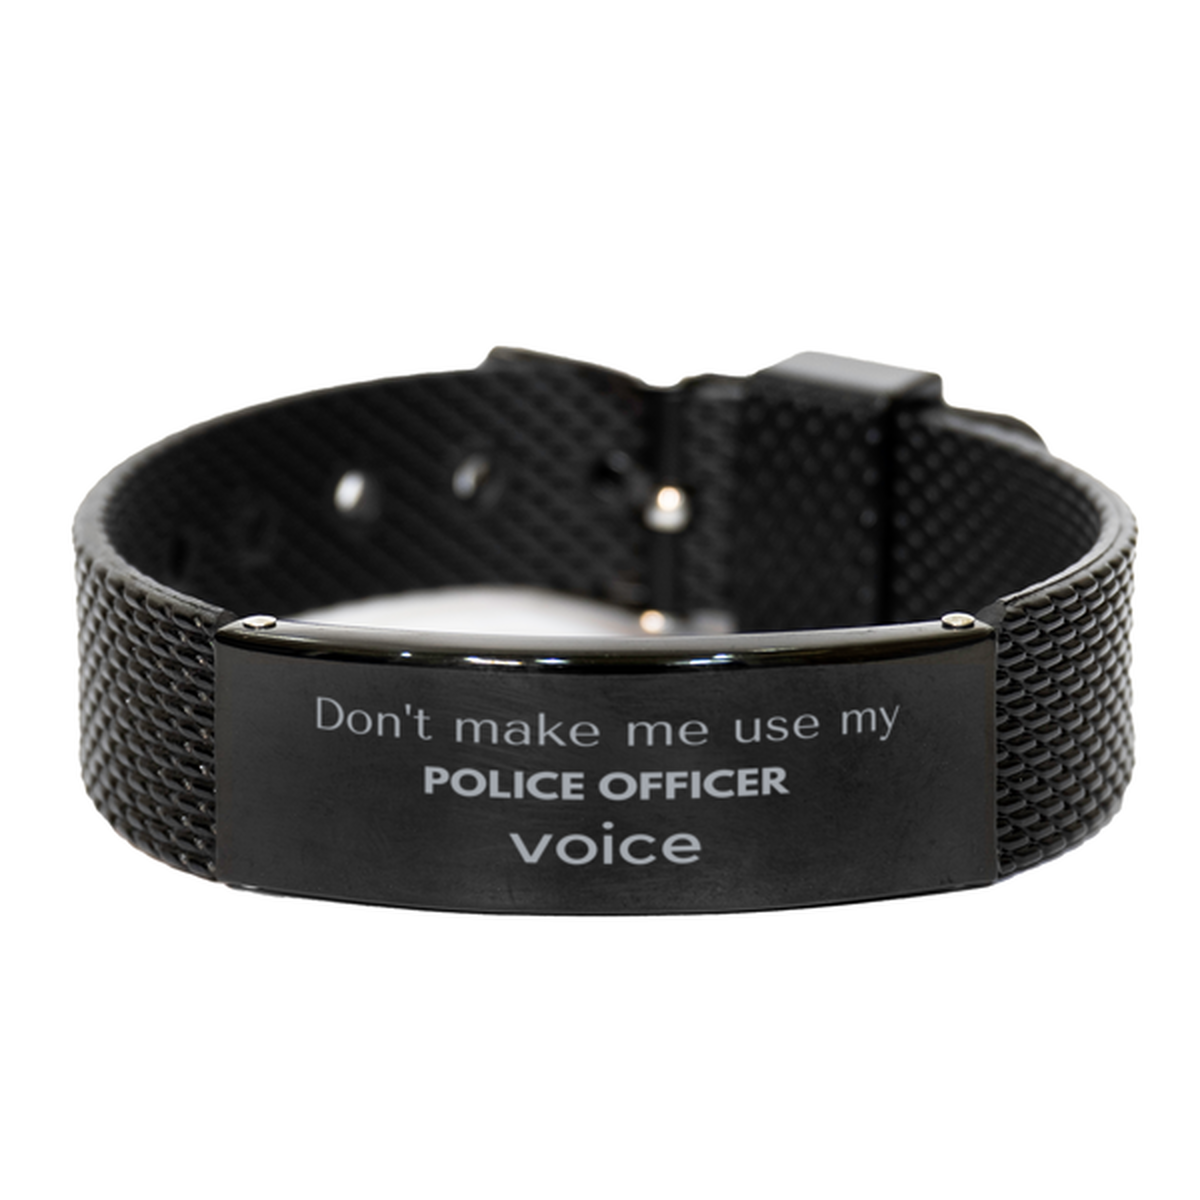 Don't make me use my Police Officer voice, Sarcasm Police Officer Gifts, Christmas Police Officer Black Shark Mesh Bracelet Birthday Unique Gifts For Police Officer Coworkers, Men, Women, Colleague, Friends